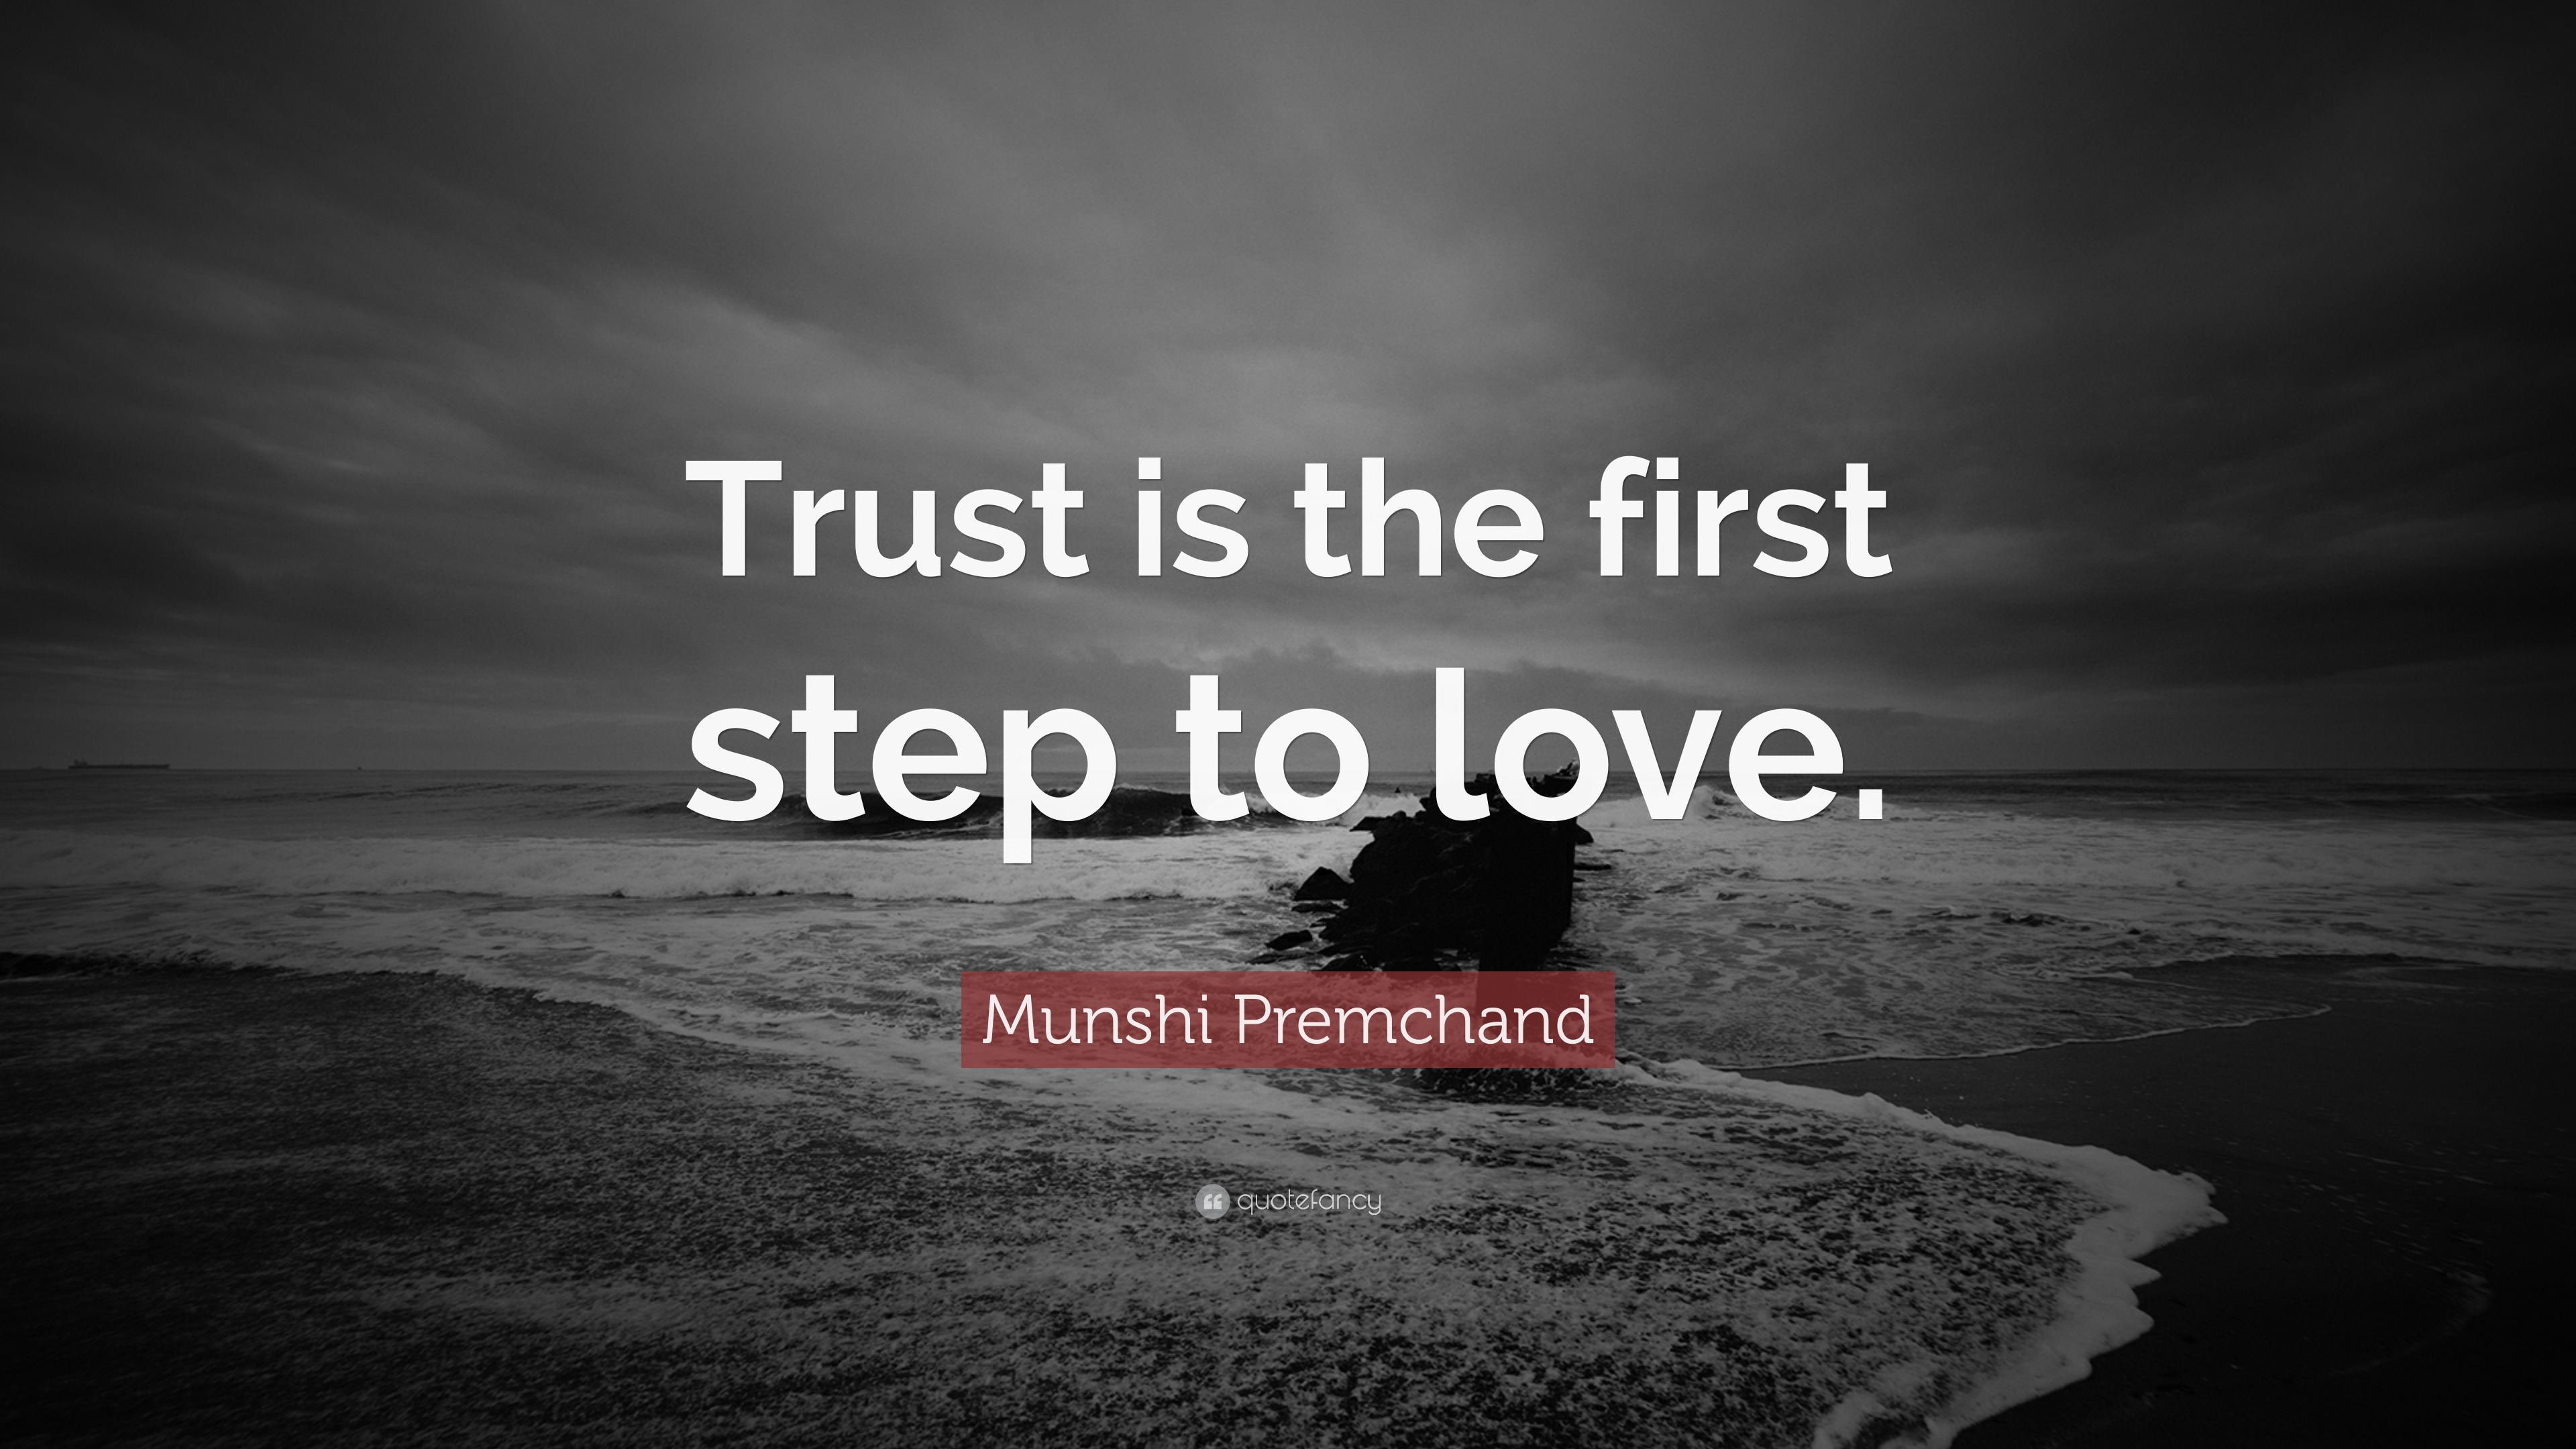 Munshi Premchand Quote “Trust is the first step to love ”